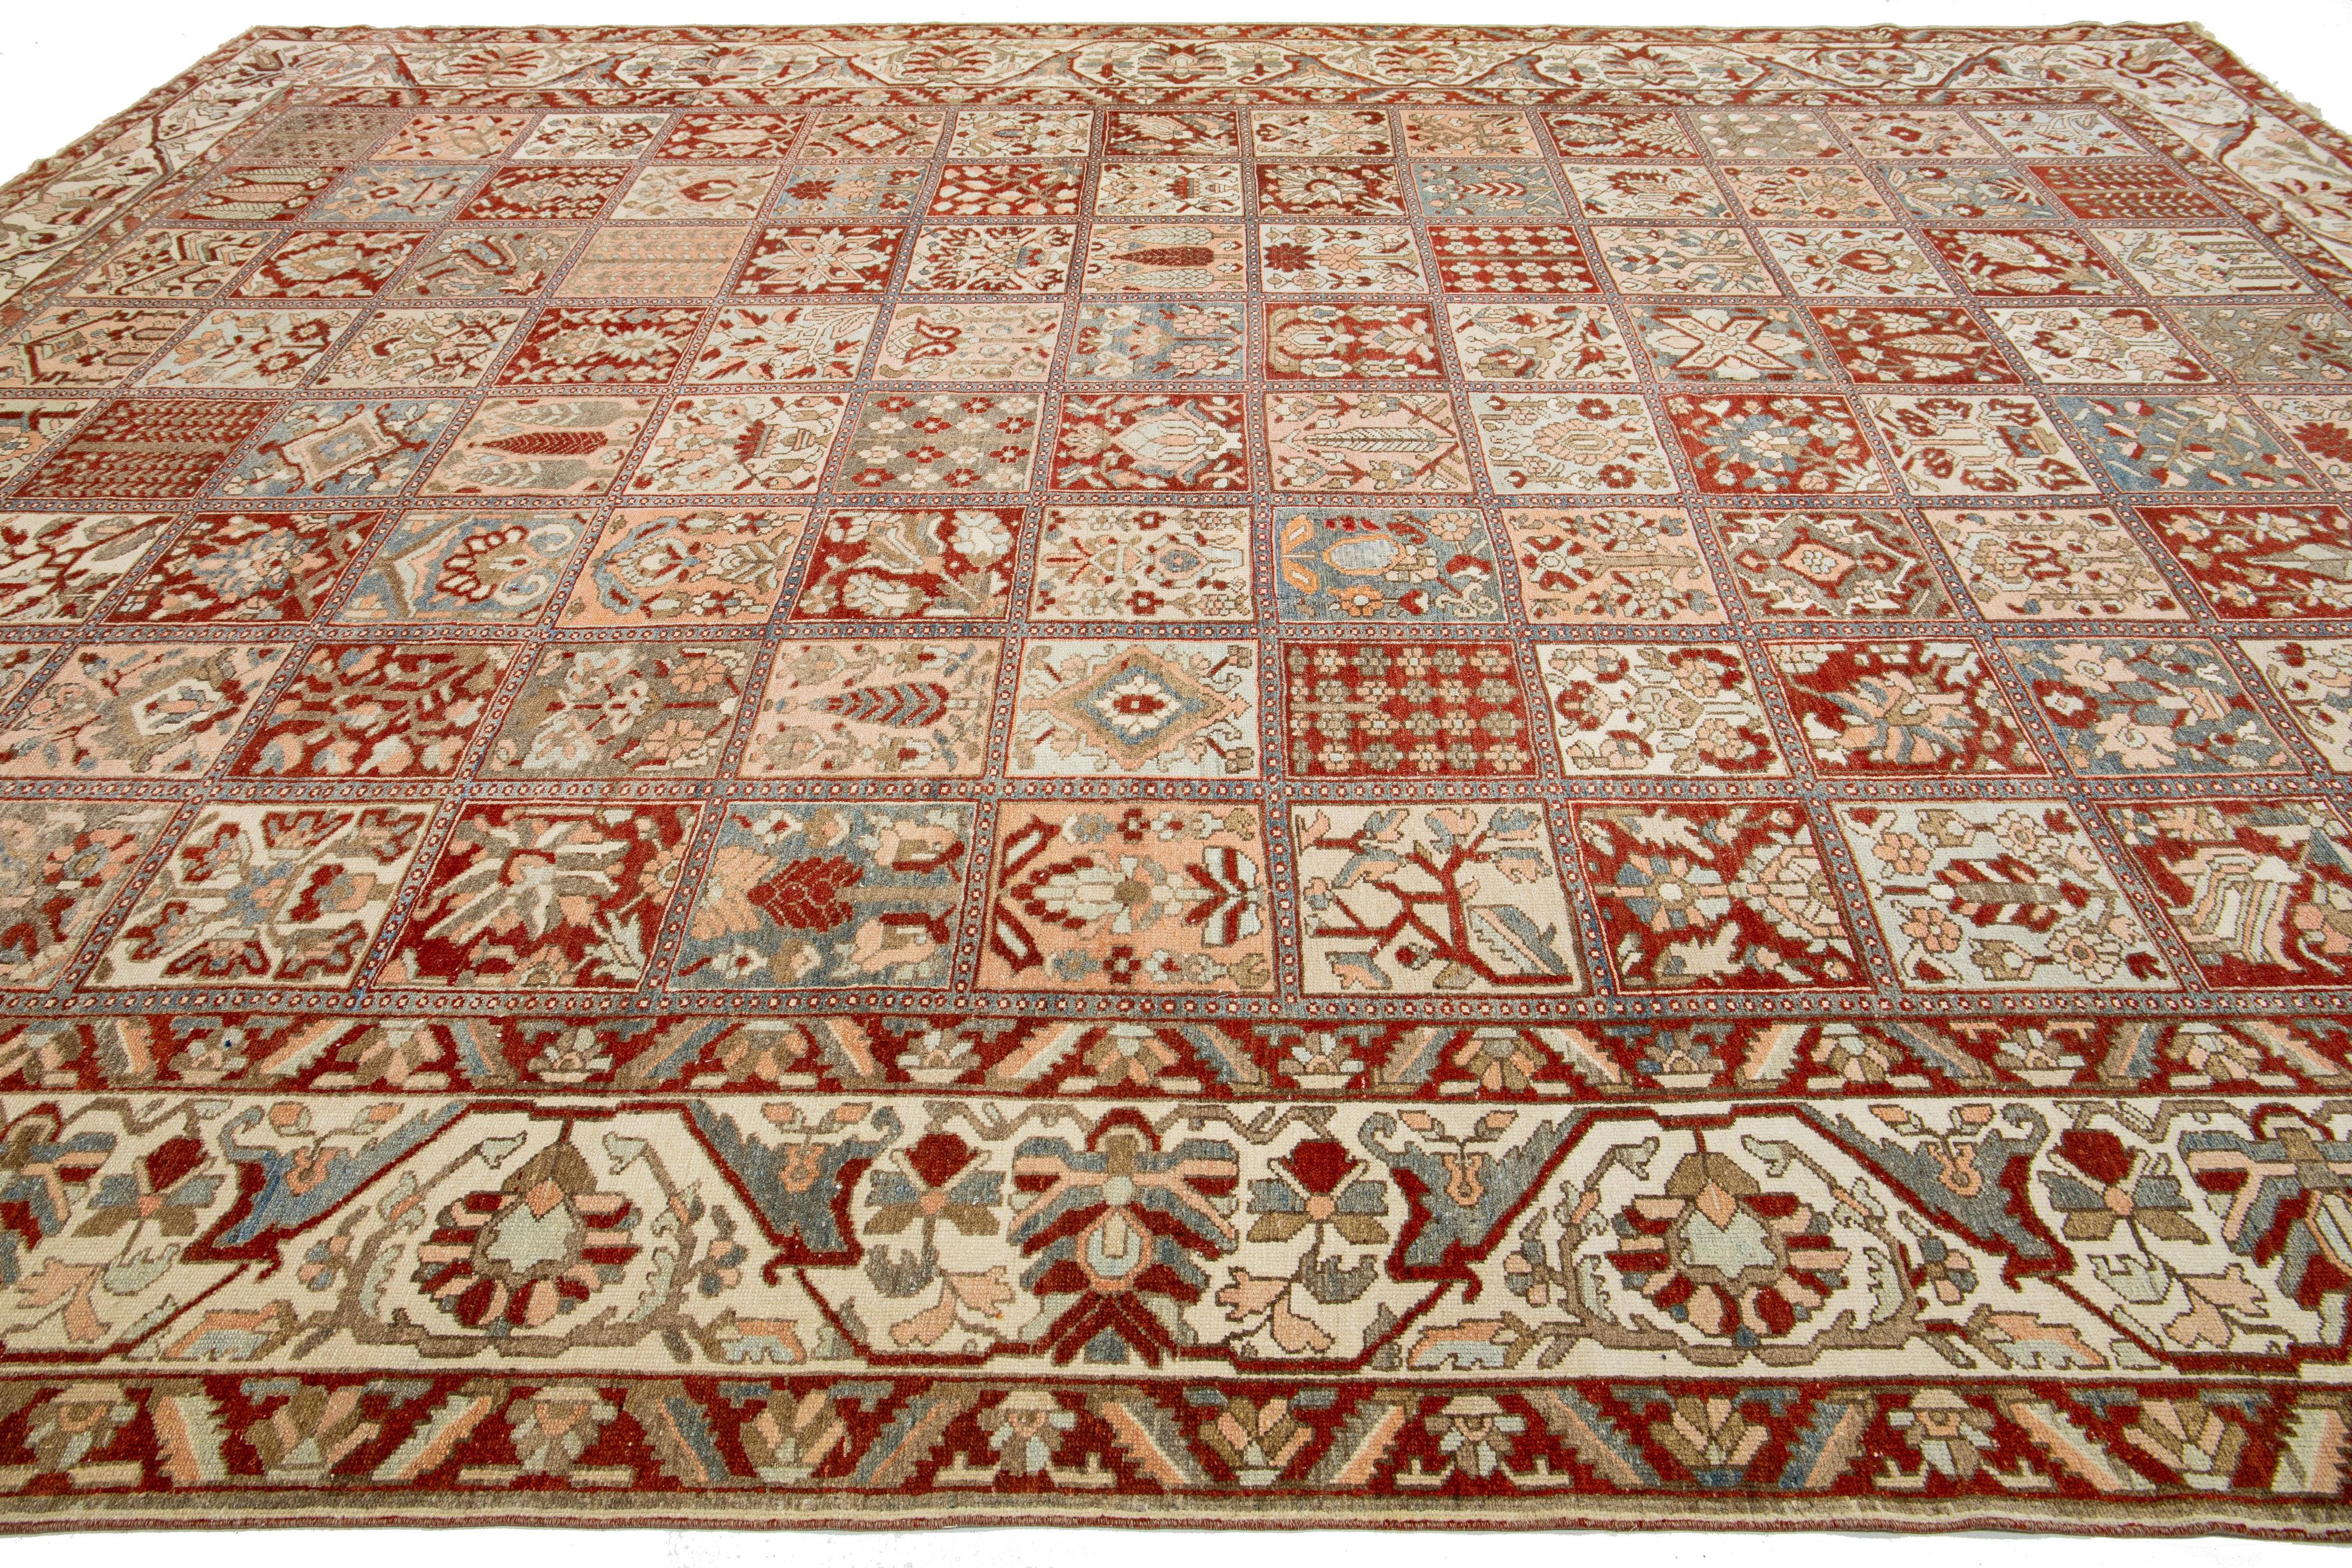 The Floral Persian Bakhtiari Rust Wool Rug Handcrafted in the 1920s (Persisch) im Angebot